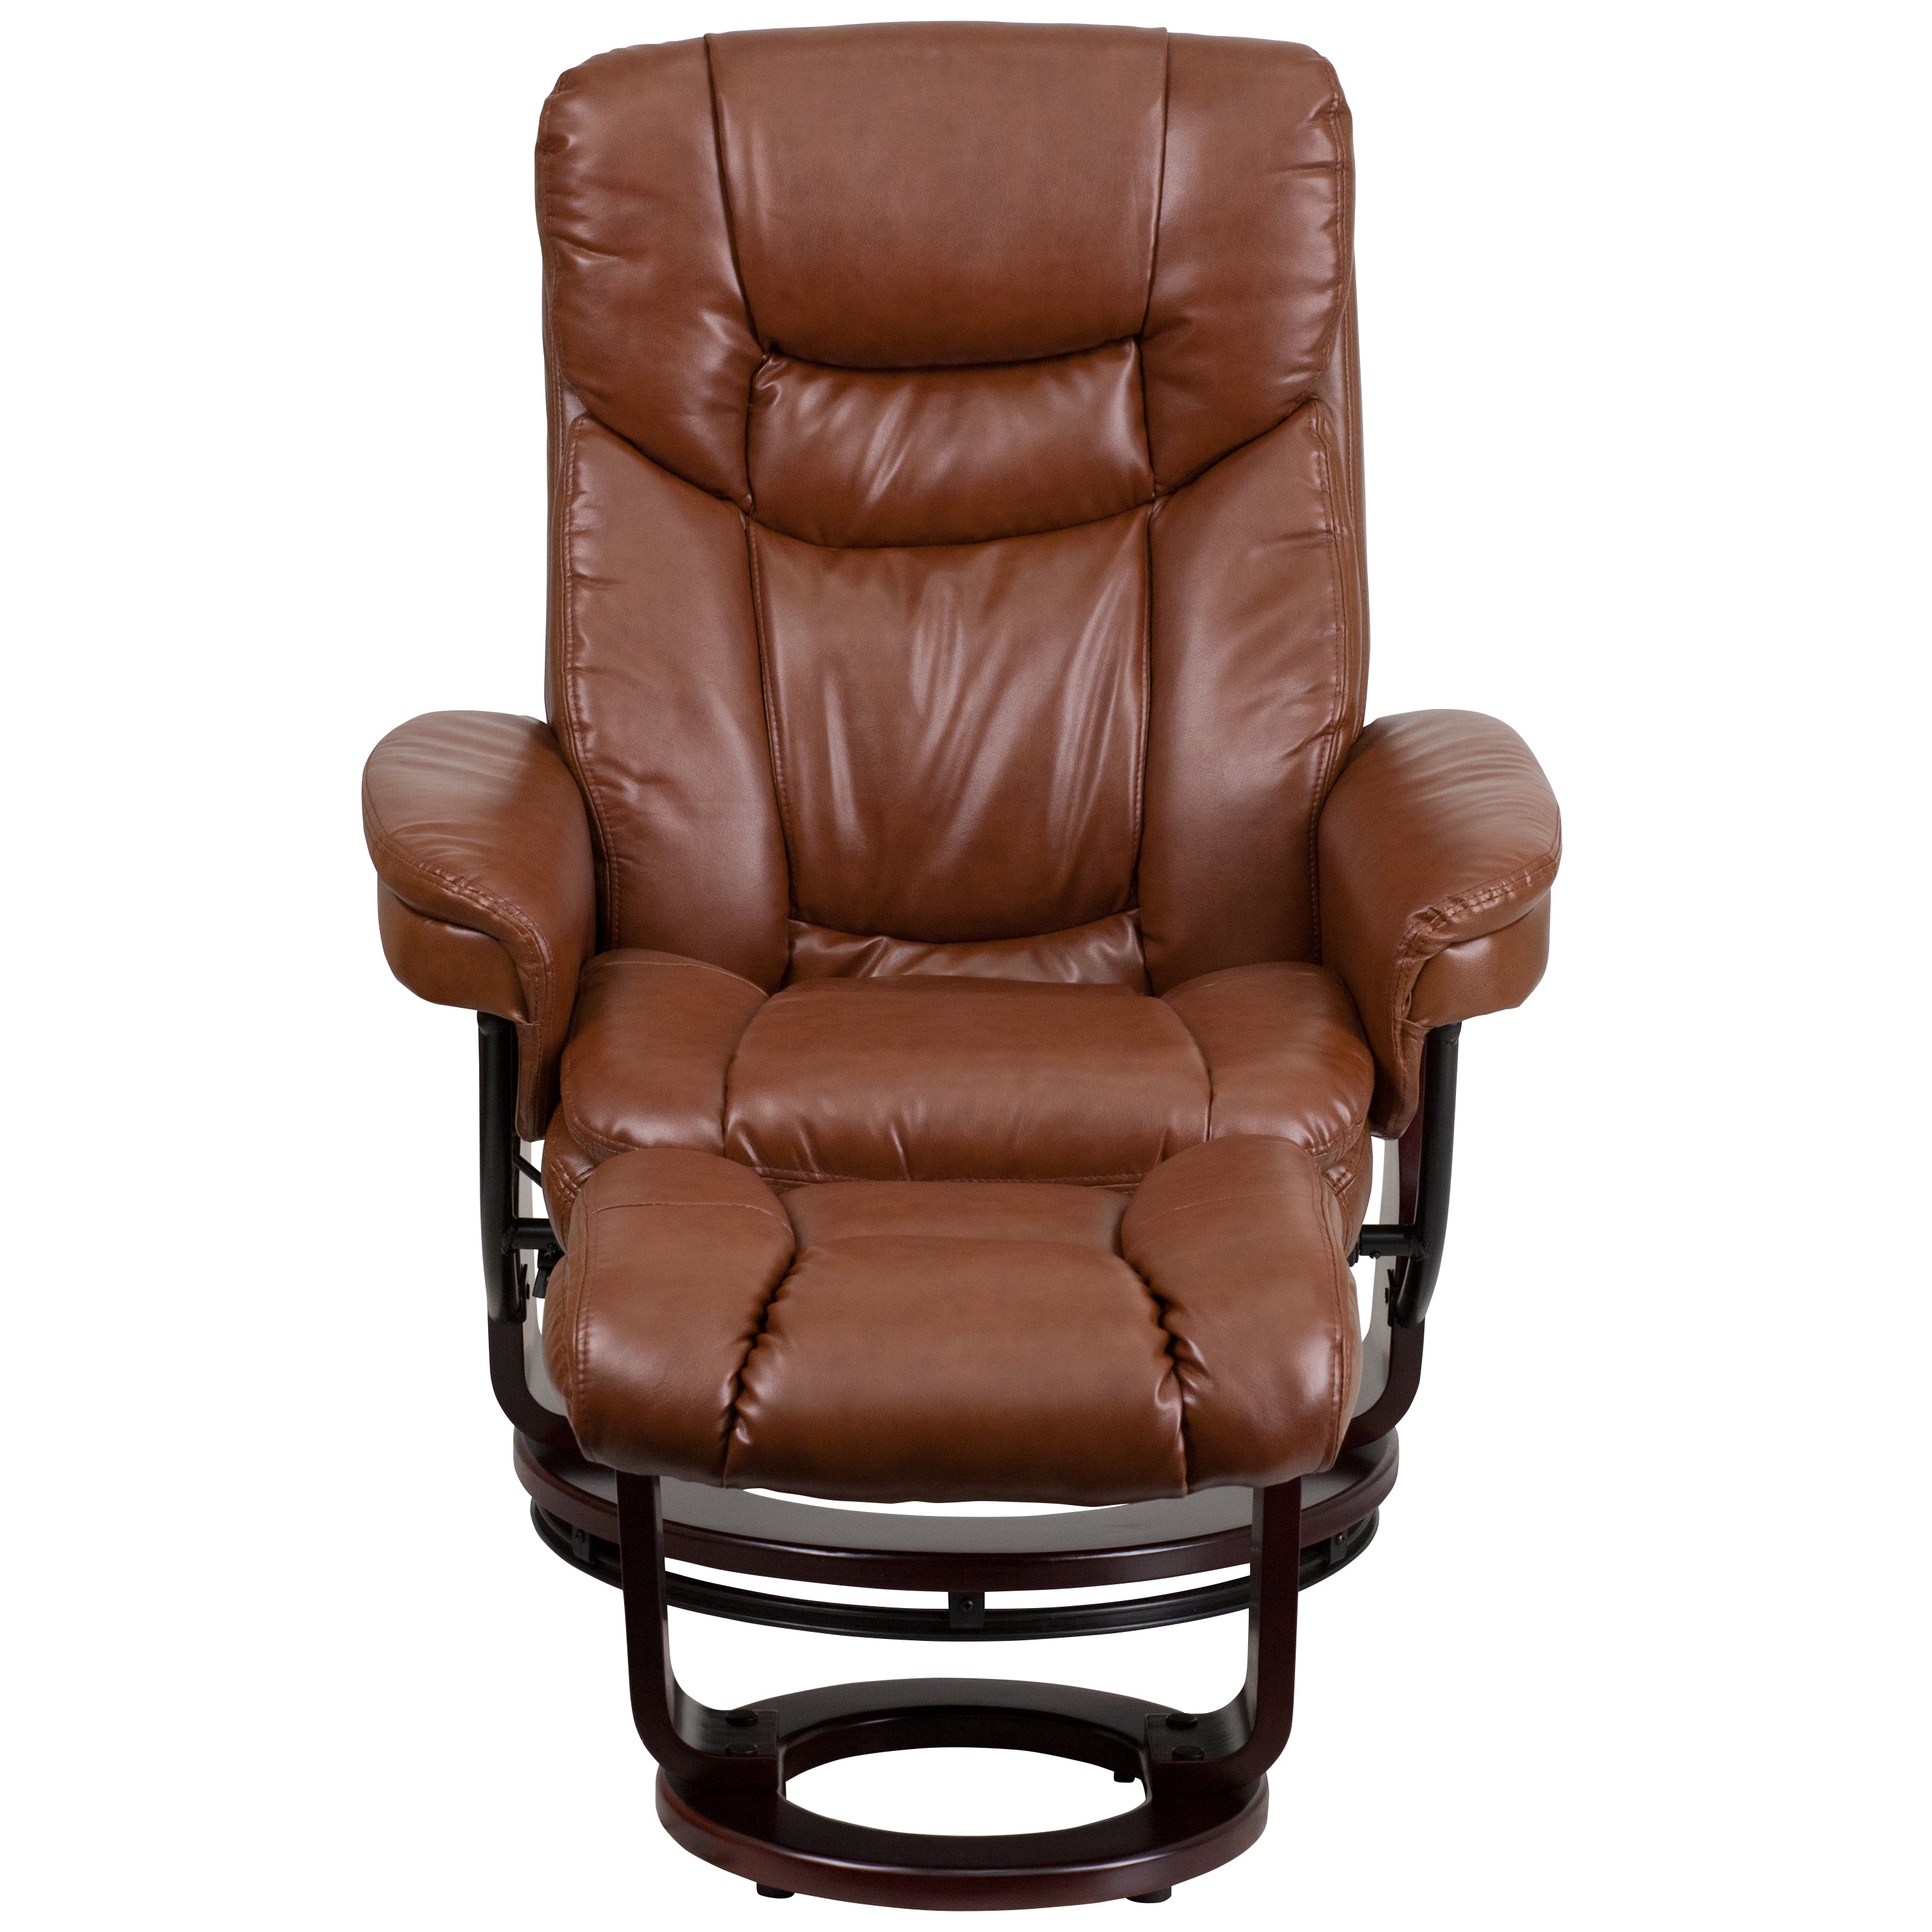 Contemporary Multi-Position Recliner and Curved Ottoman with Swivel Mahogany Wood Base-Office Recliner-Flash Furniture-Wall2Wall Furnishings